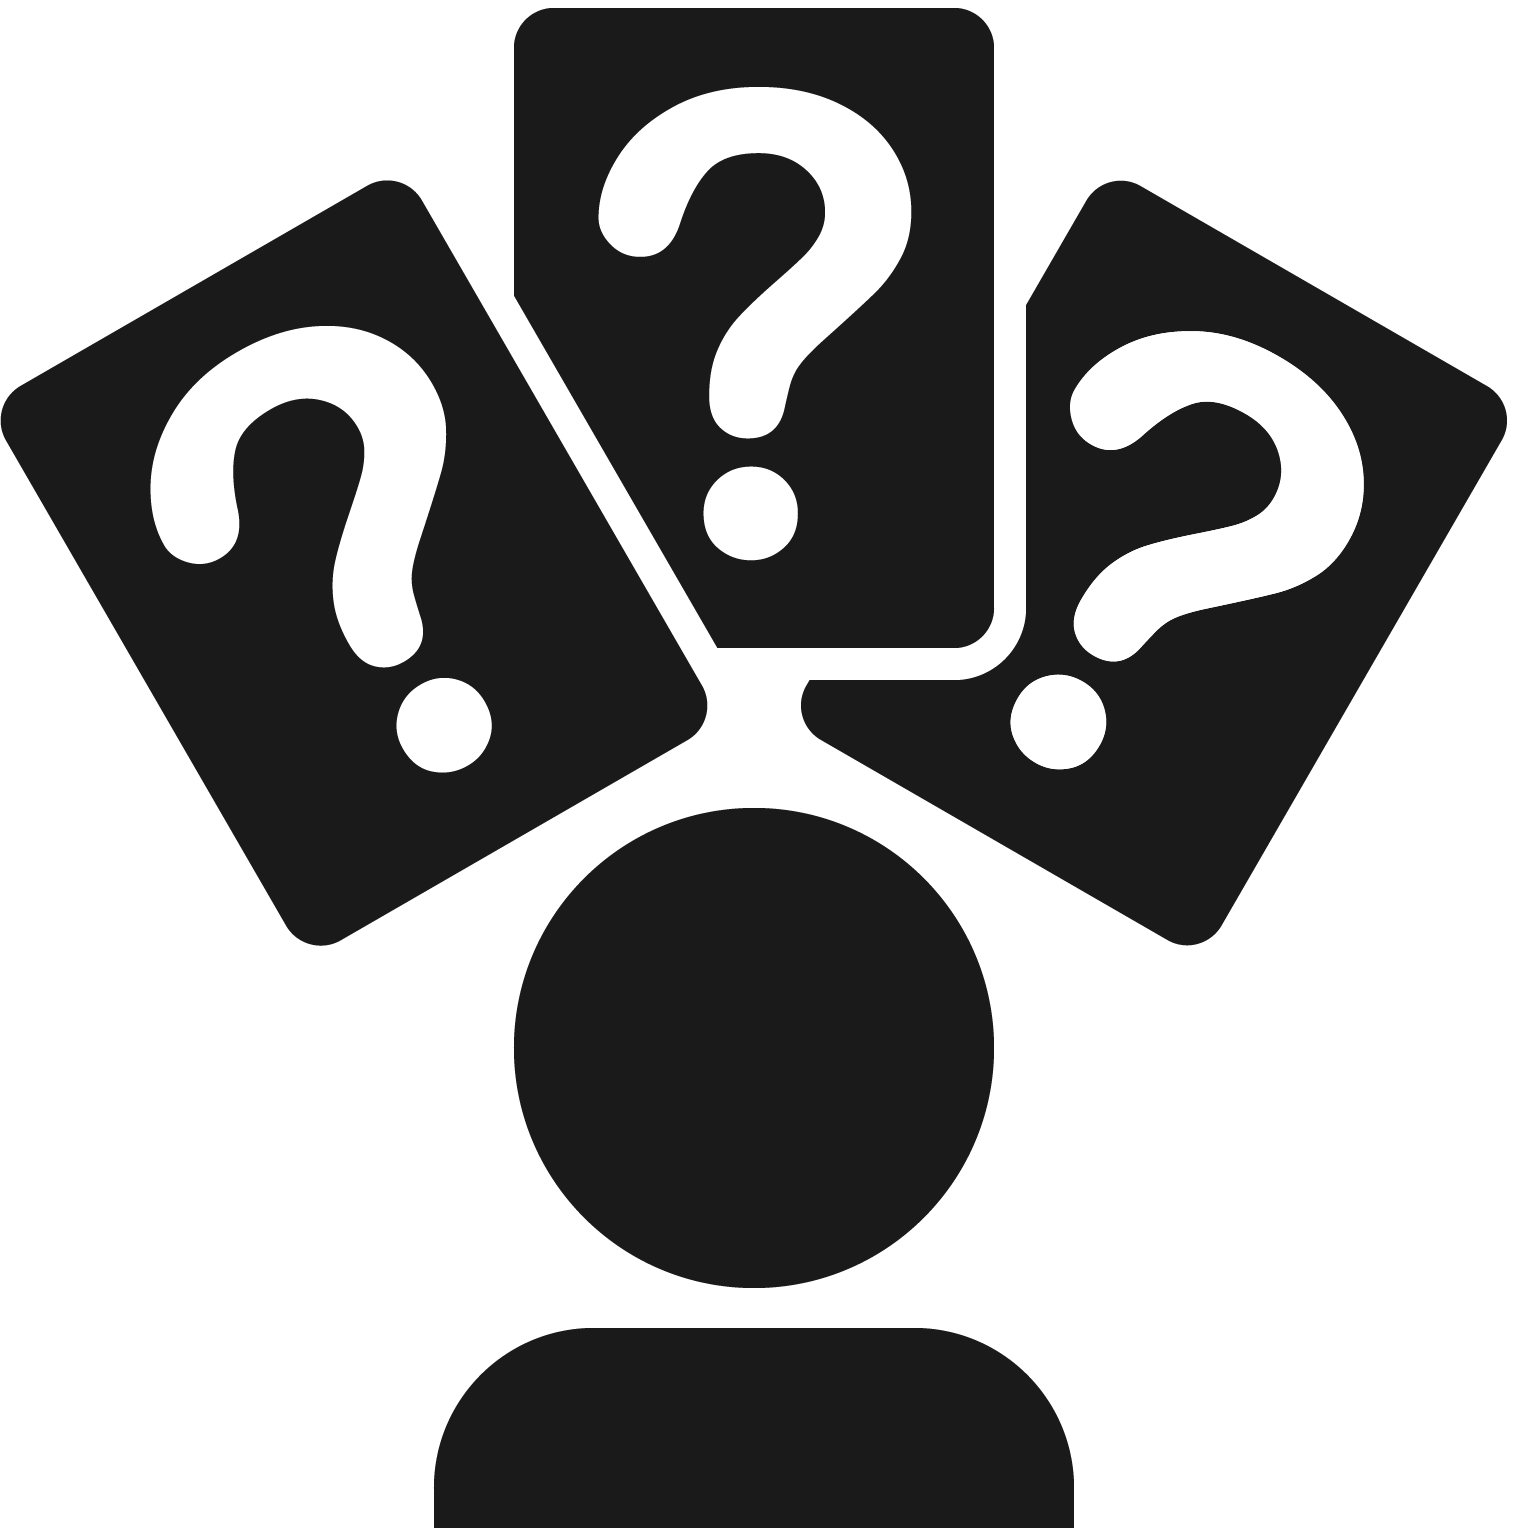 discussion clipart discussion question